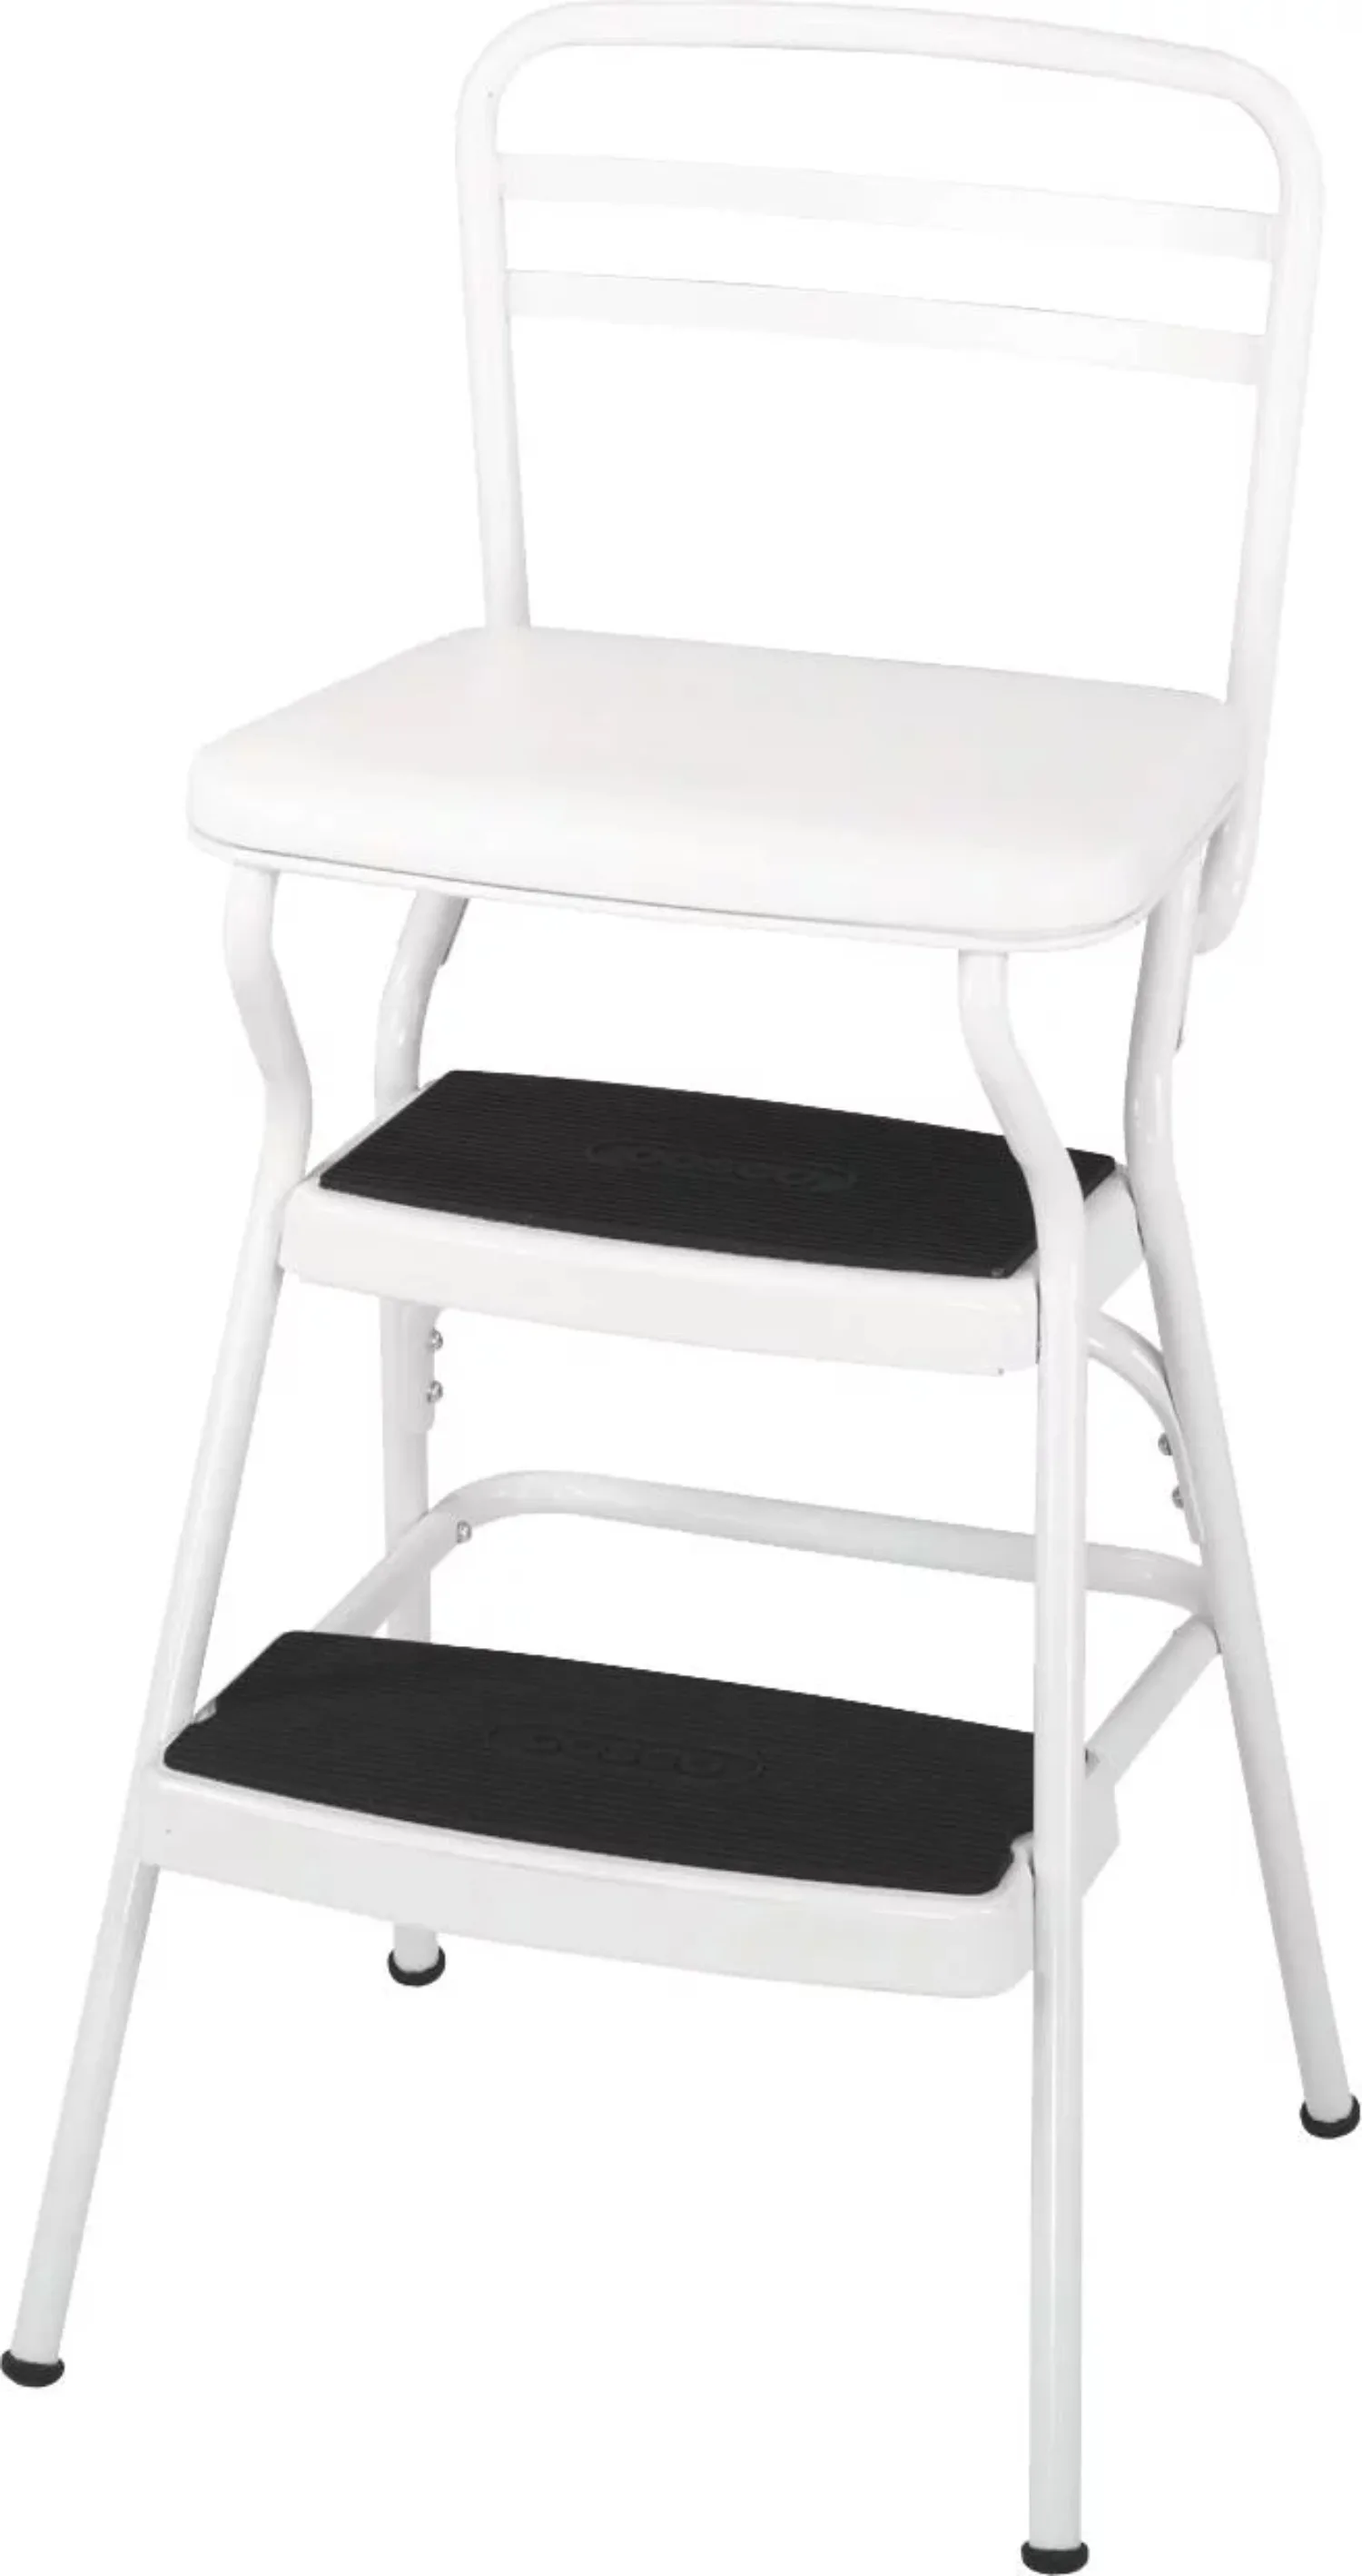 

COSCO Stylaire Retro Chair + Step Stool with flip-up seat (white, one pack) Step Ladder For Home